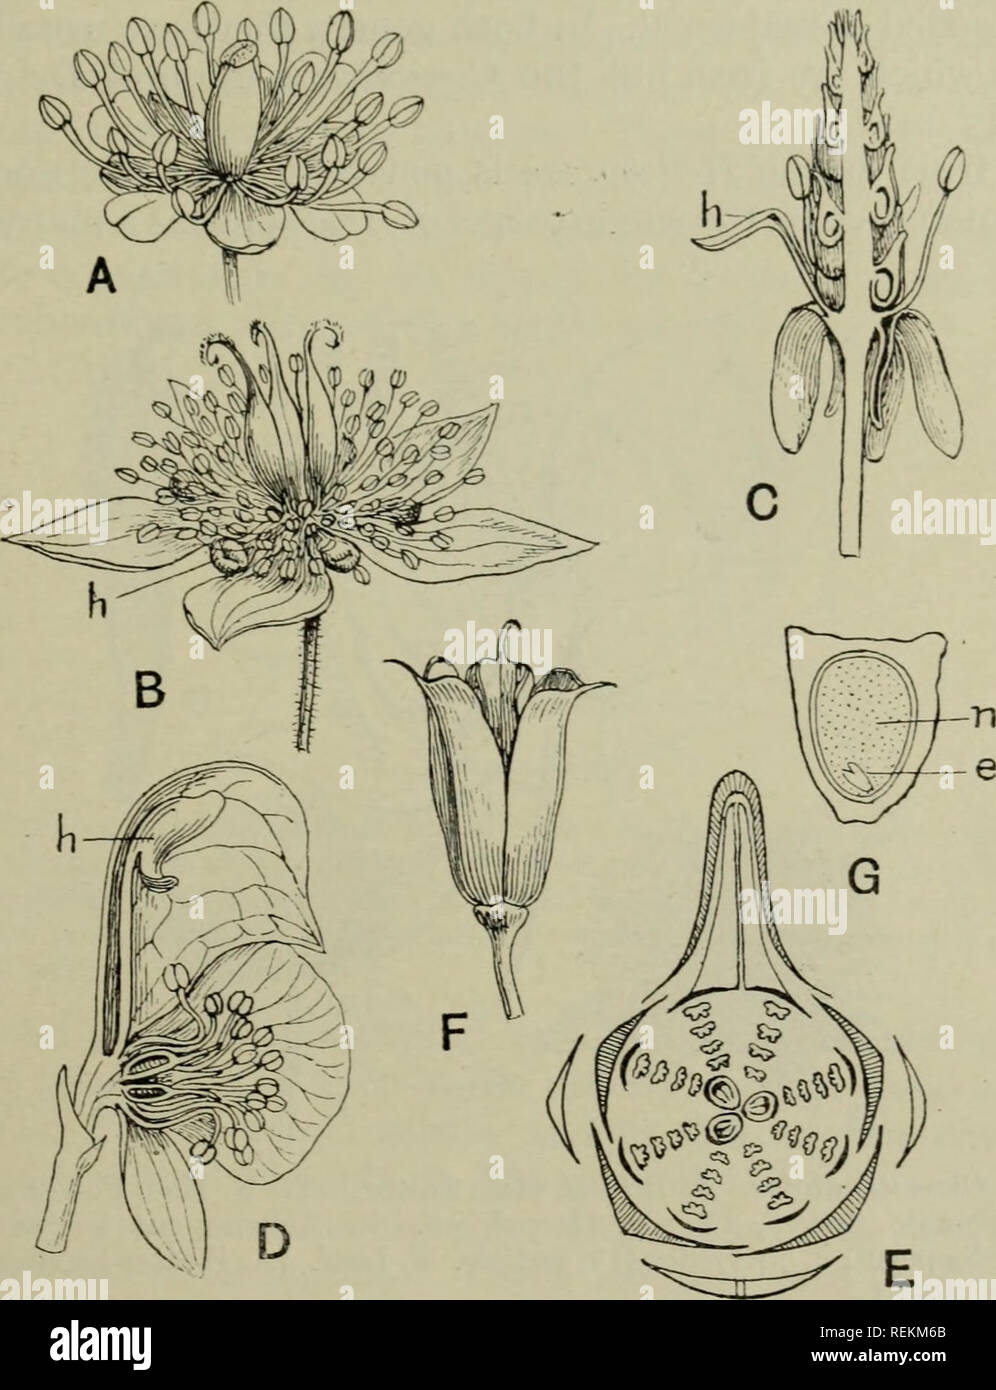 . The classification of flowering plants. Plants. RAN UNCULACE AE from a Nigella-hke flower. The stamens and carpels are spirally arranged and shew no trace of the median symmetry which is determined by the structure of the calyx and corolla. The calyx is arranged in the quincuncial whorl, so frequent in Dicotyledons, that is the second-developed sepal is median and j^osterior; in Delphinium this is spurred. There are originally, as in Nigella,. Fig. 67. A. Flower of Actaea spicata. B. Flower of Coptis trifolia. C. Flower of Myosurus minimus in vertical section. D. Flower of Aconitum Napellus  Stock Photo